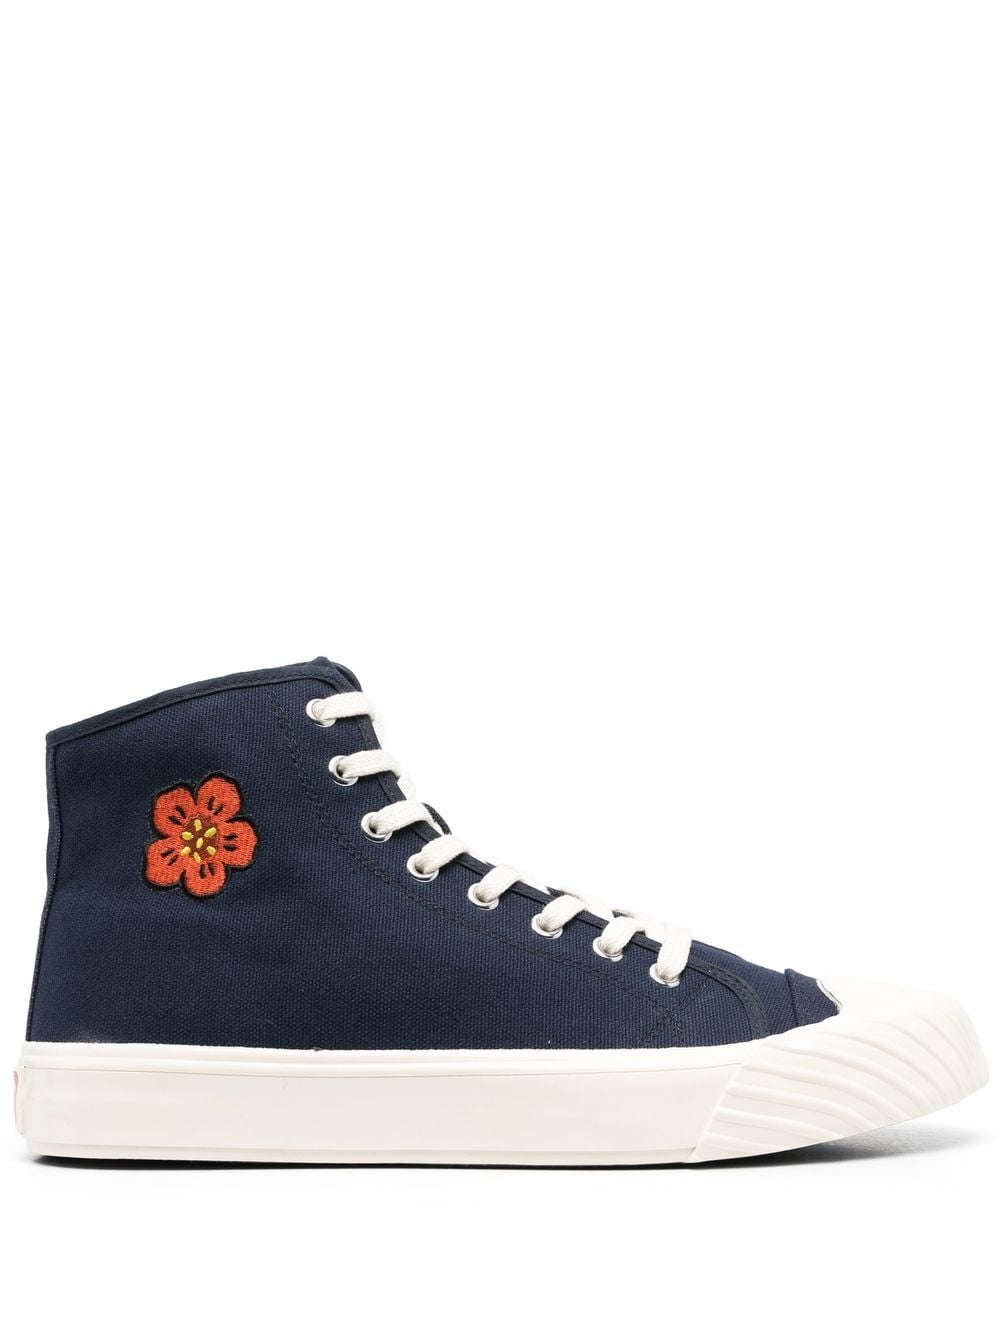 KENZO HIGH-TOP LACE-UP SNEAKERS